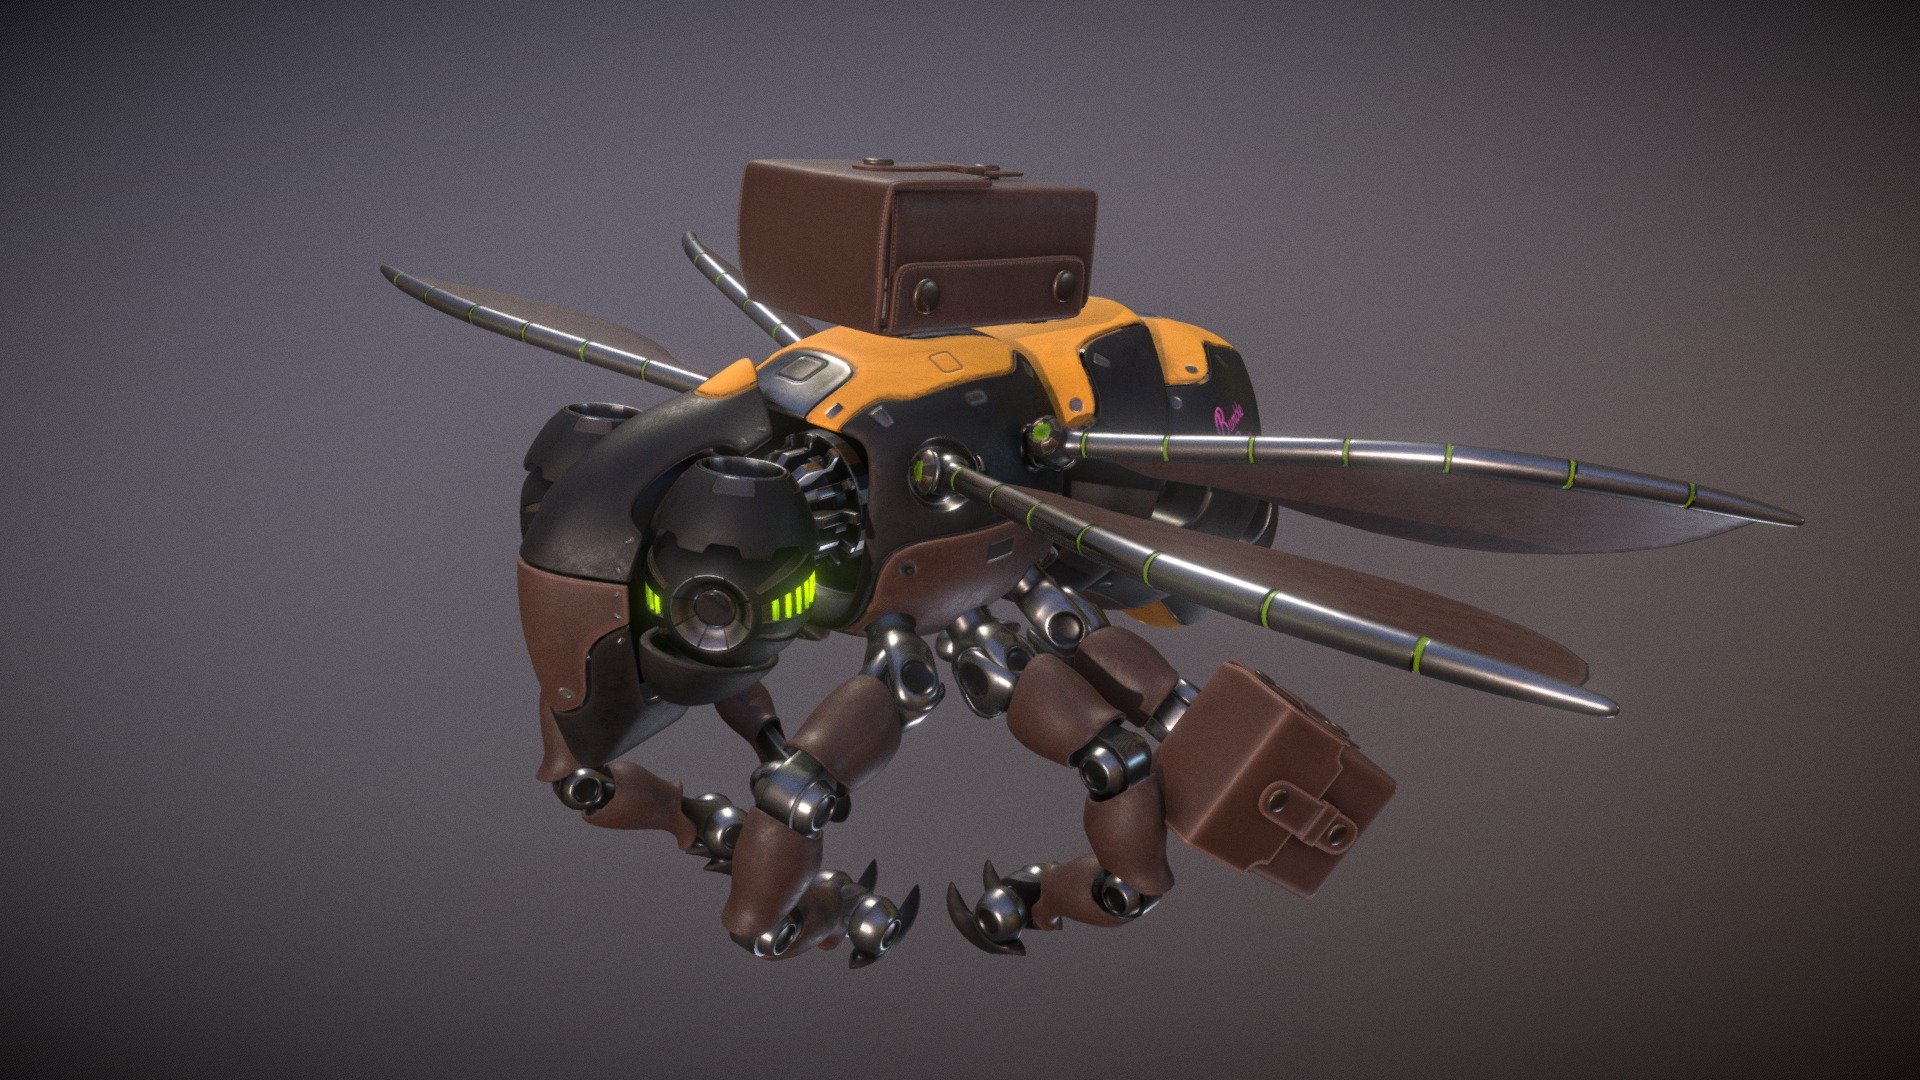 Here's a personal project I did while learning Blender 2.8
Textured in Substance Painter
The idea was to create a replacement for dying bumble bees 3d model